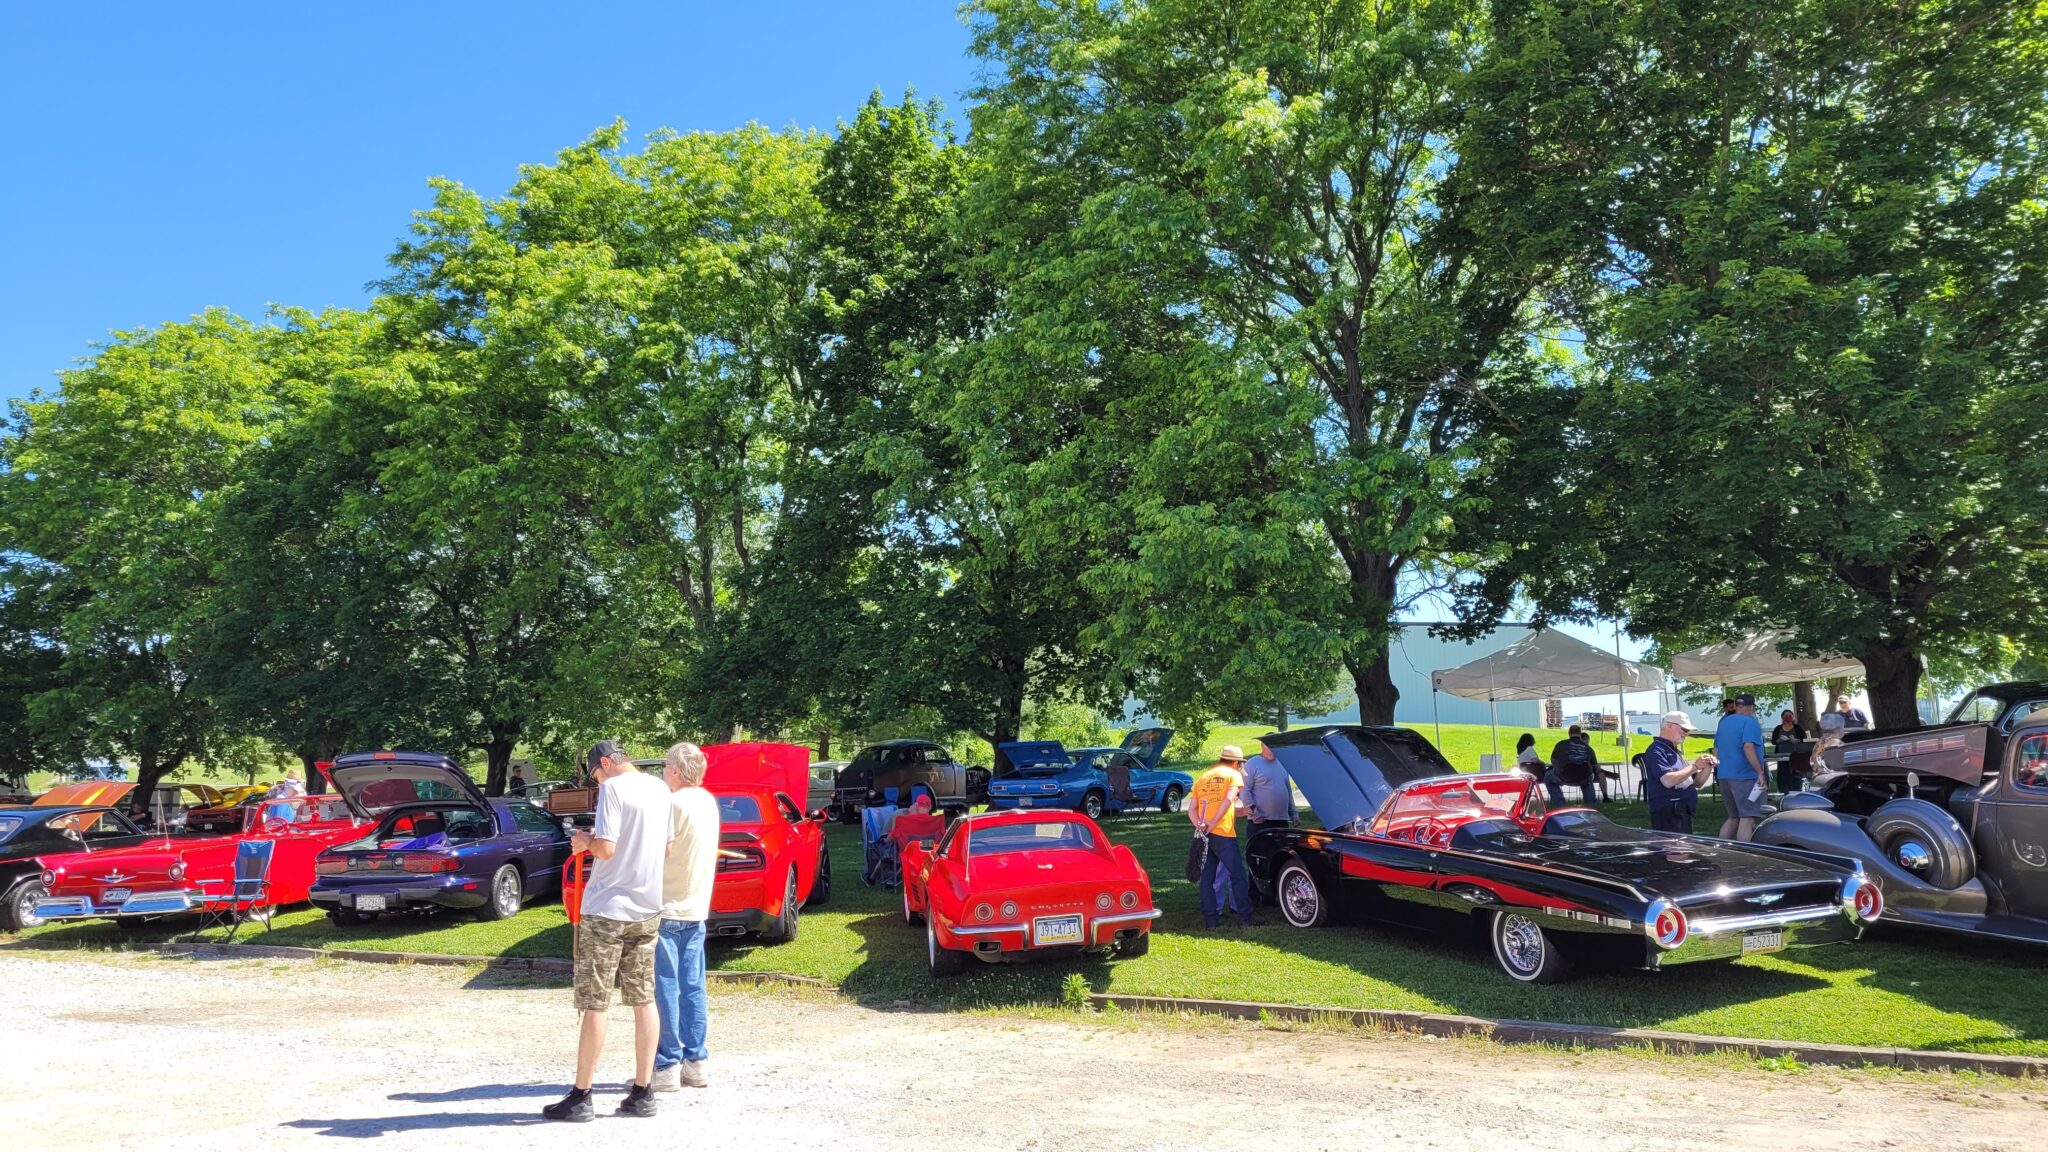 Classic and vintage cars lined up in the grass on the front lawn of the museum